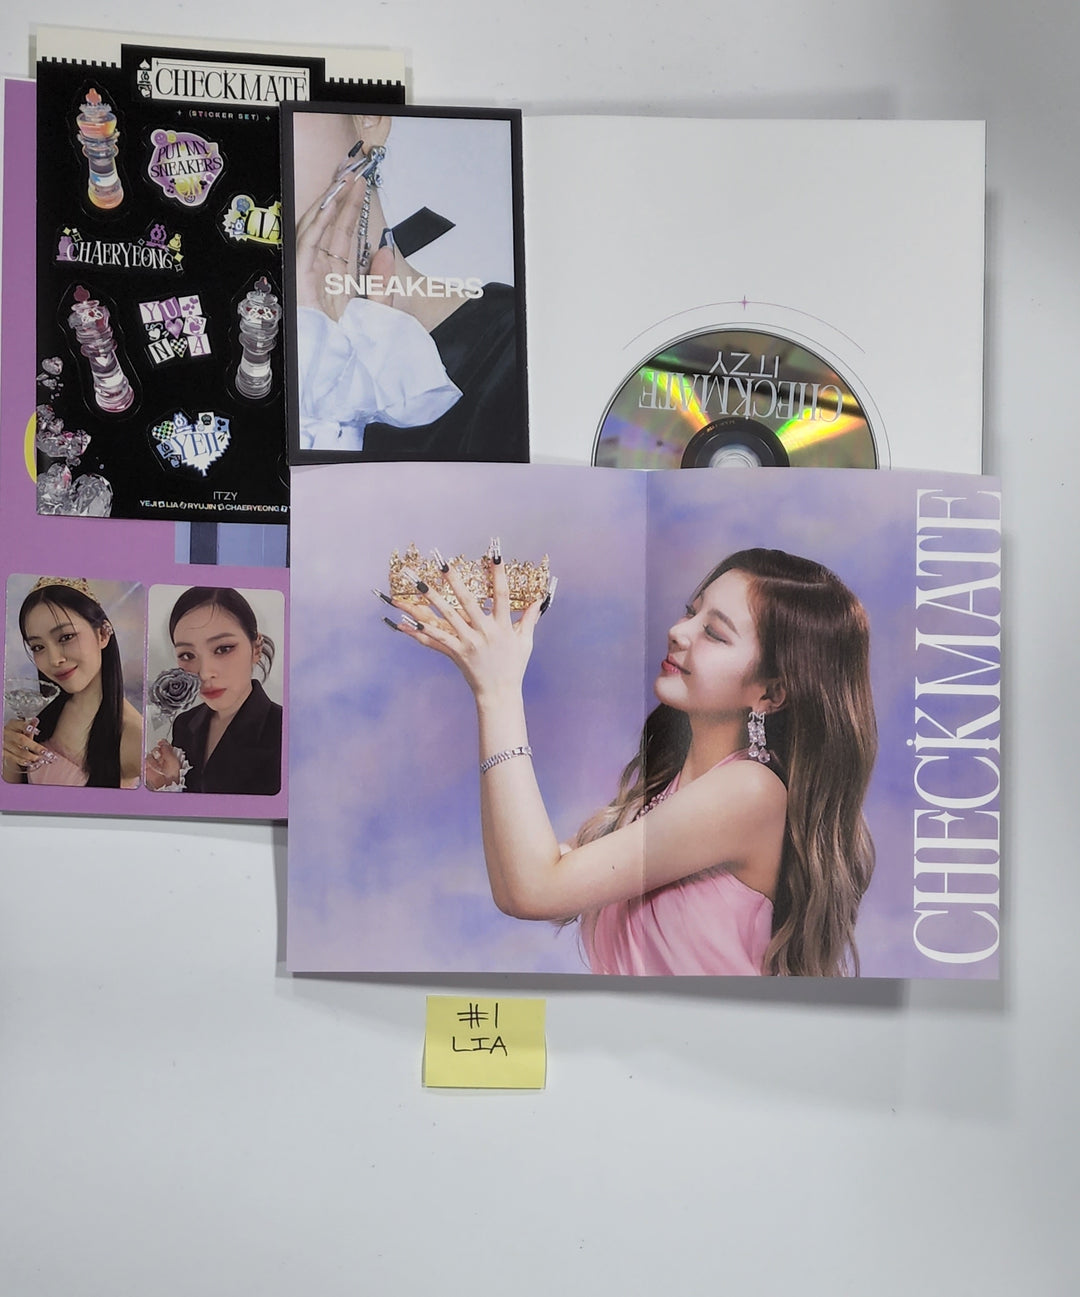 Itzy 'CHECKMATE' - Hand Autographed(Signed) Promo Album